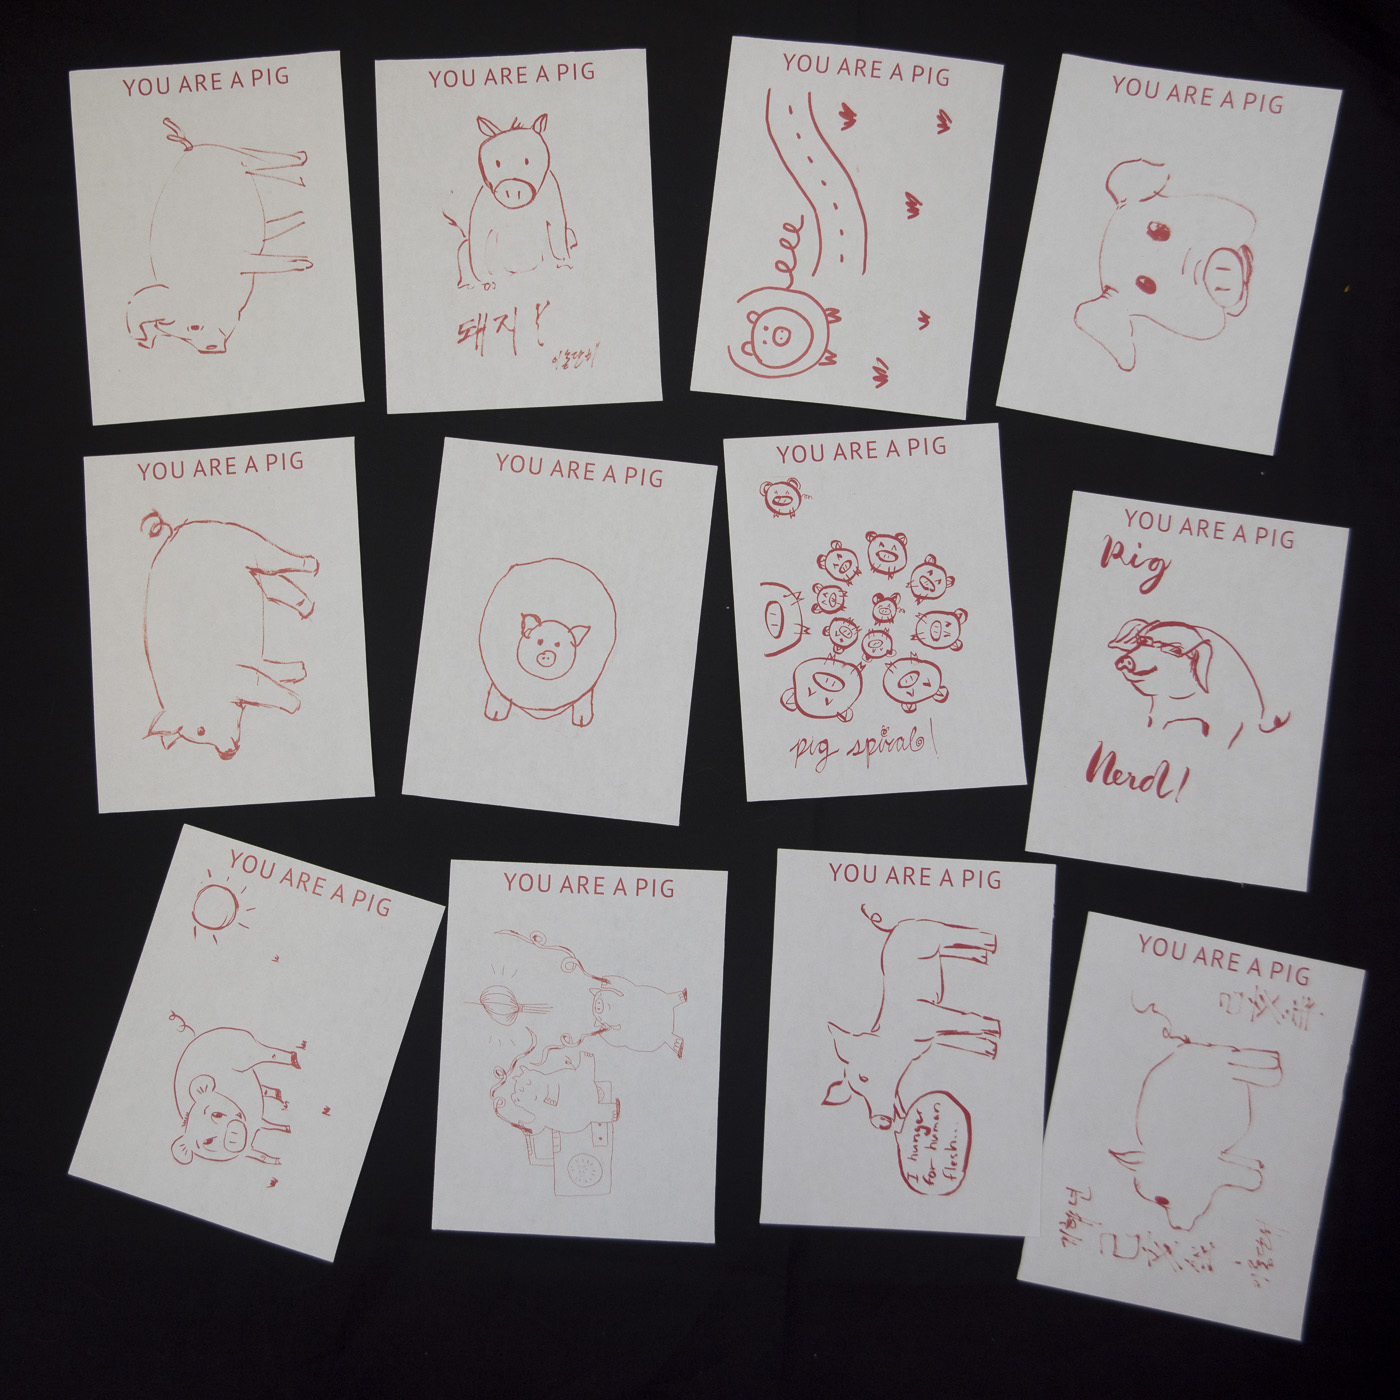 12 drawings of pigs drawn by attendees of the 19 Pigs event